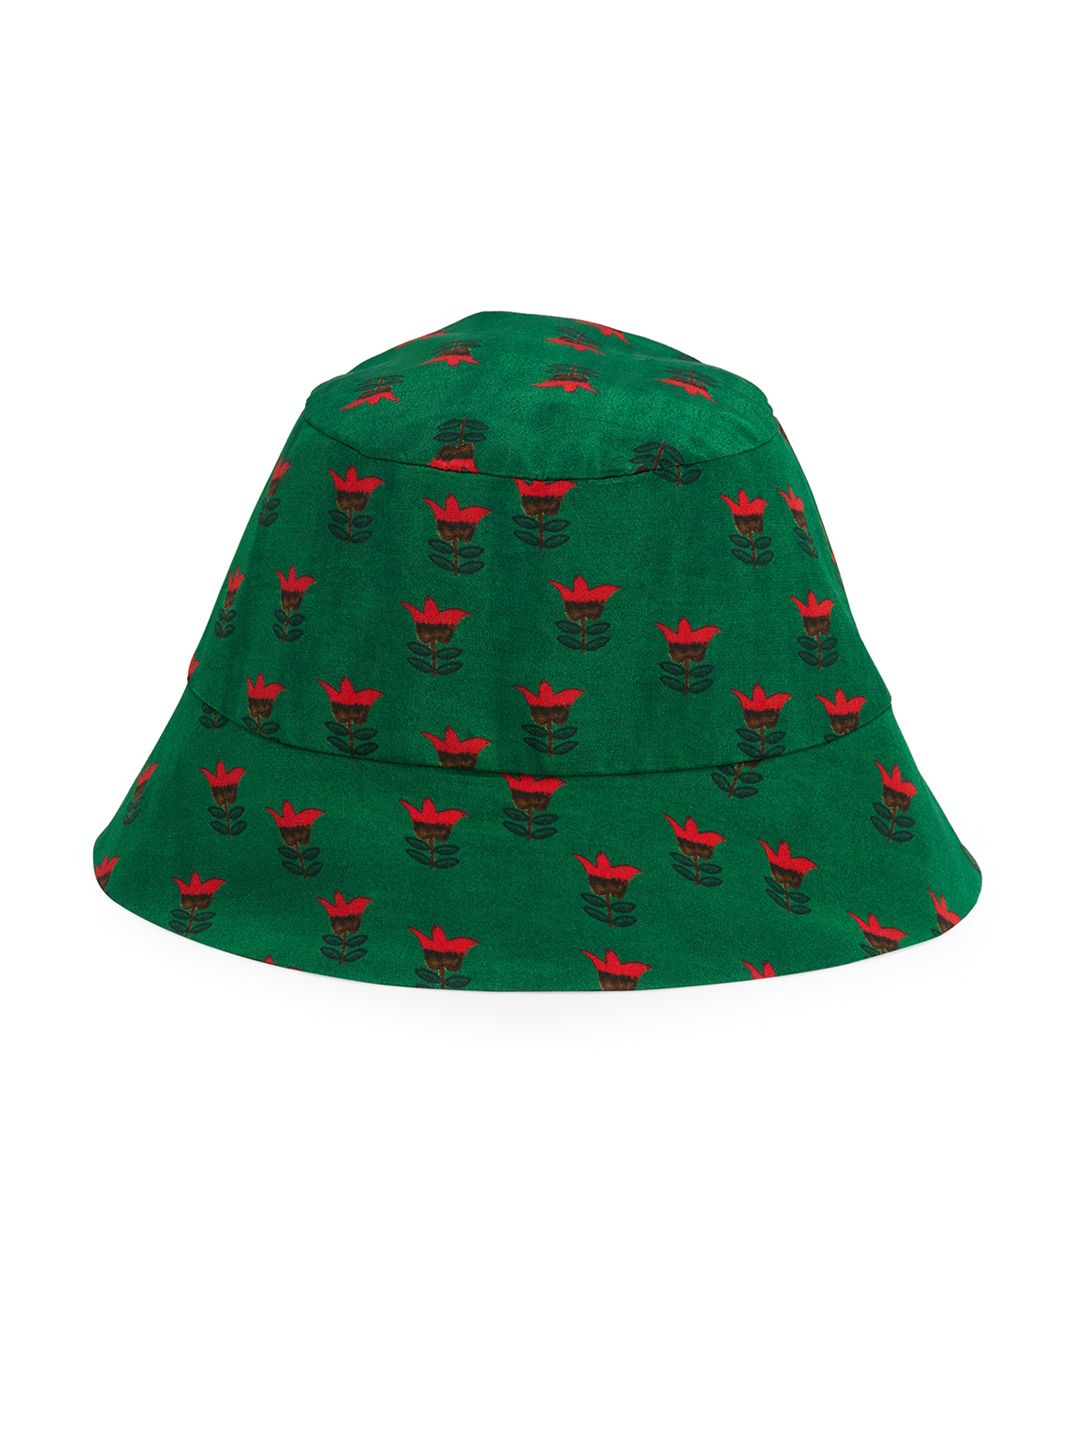 Masaba Women Green & Red Printed Bucket Hat Price in India